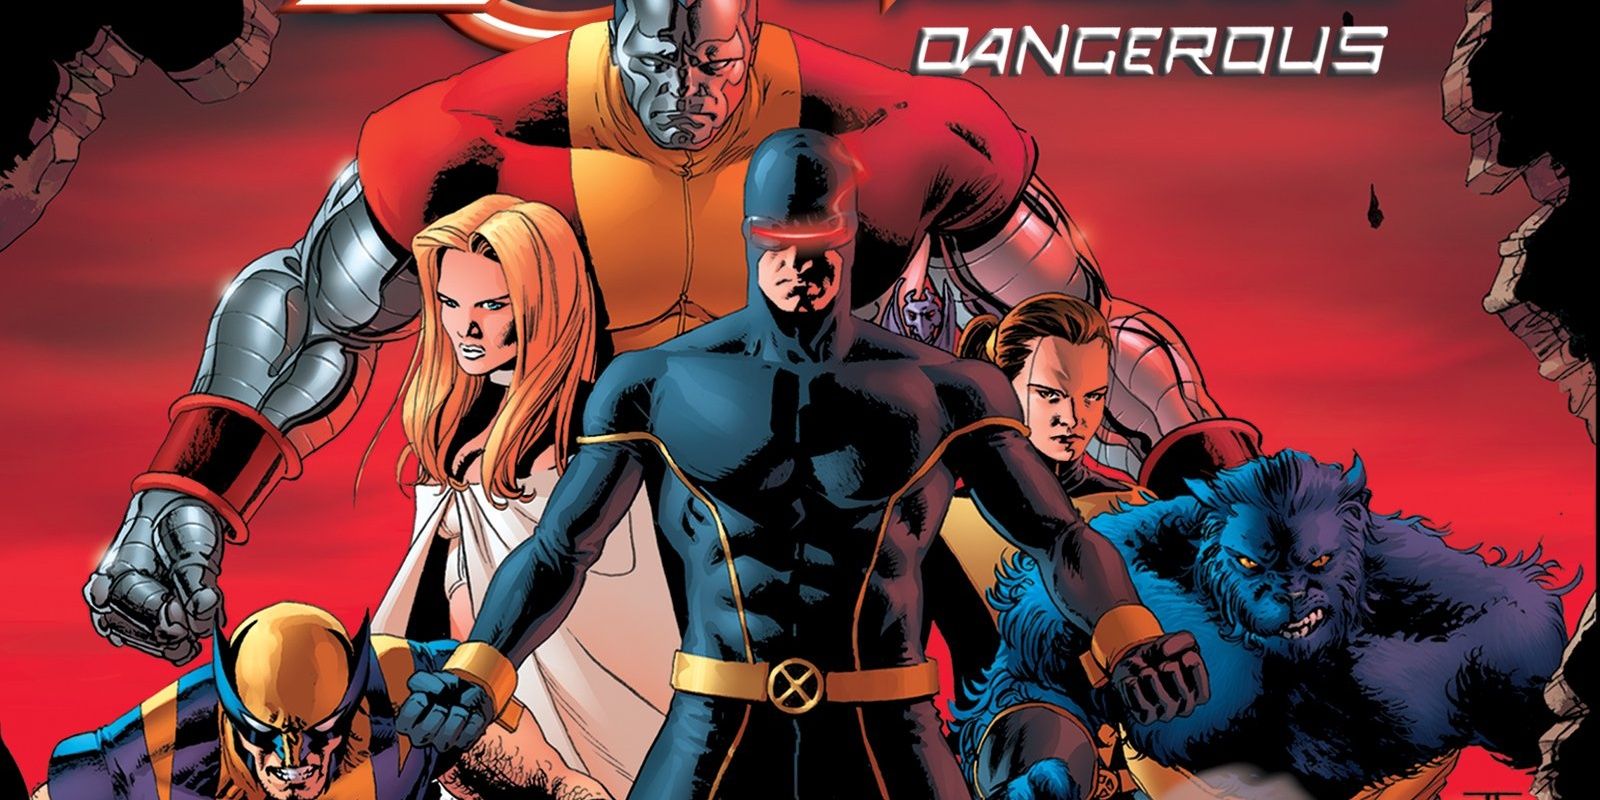 Marvel's X-Men stand united, gazing through a hole in the wall